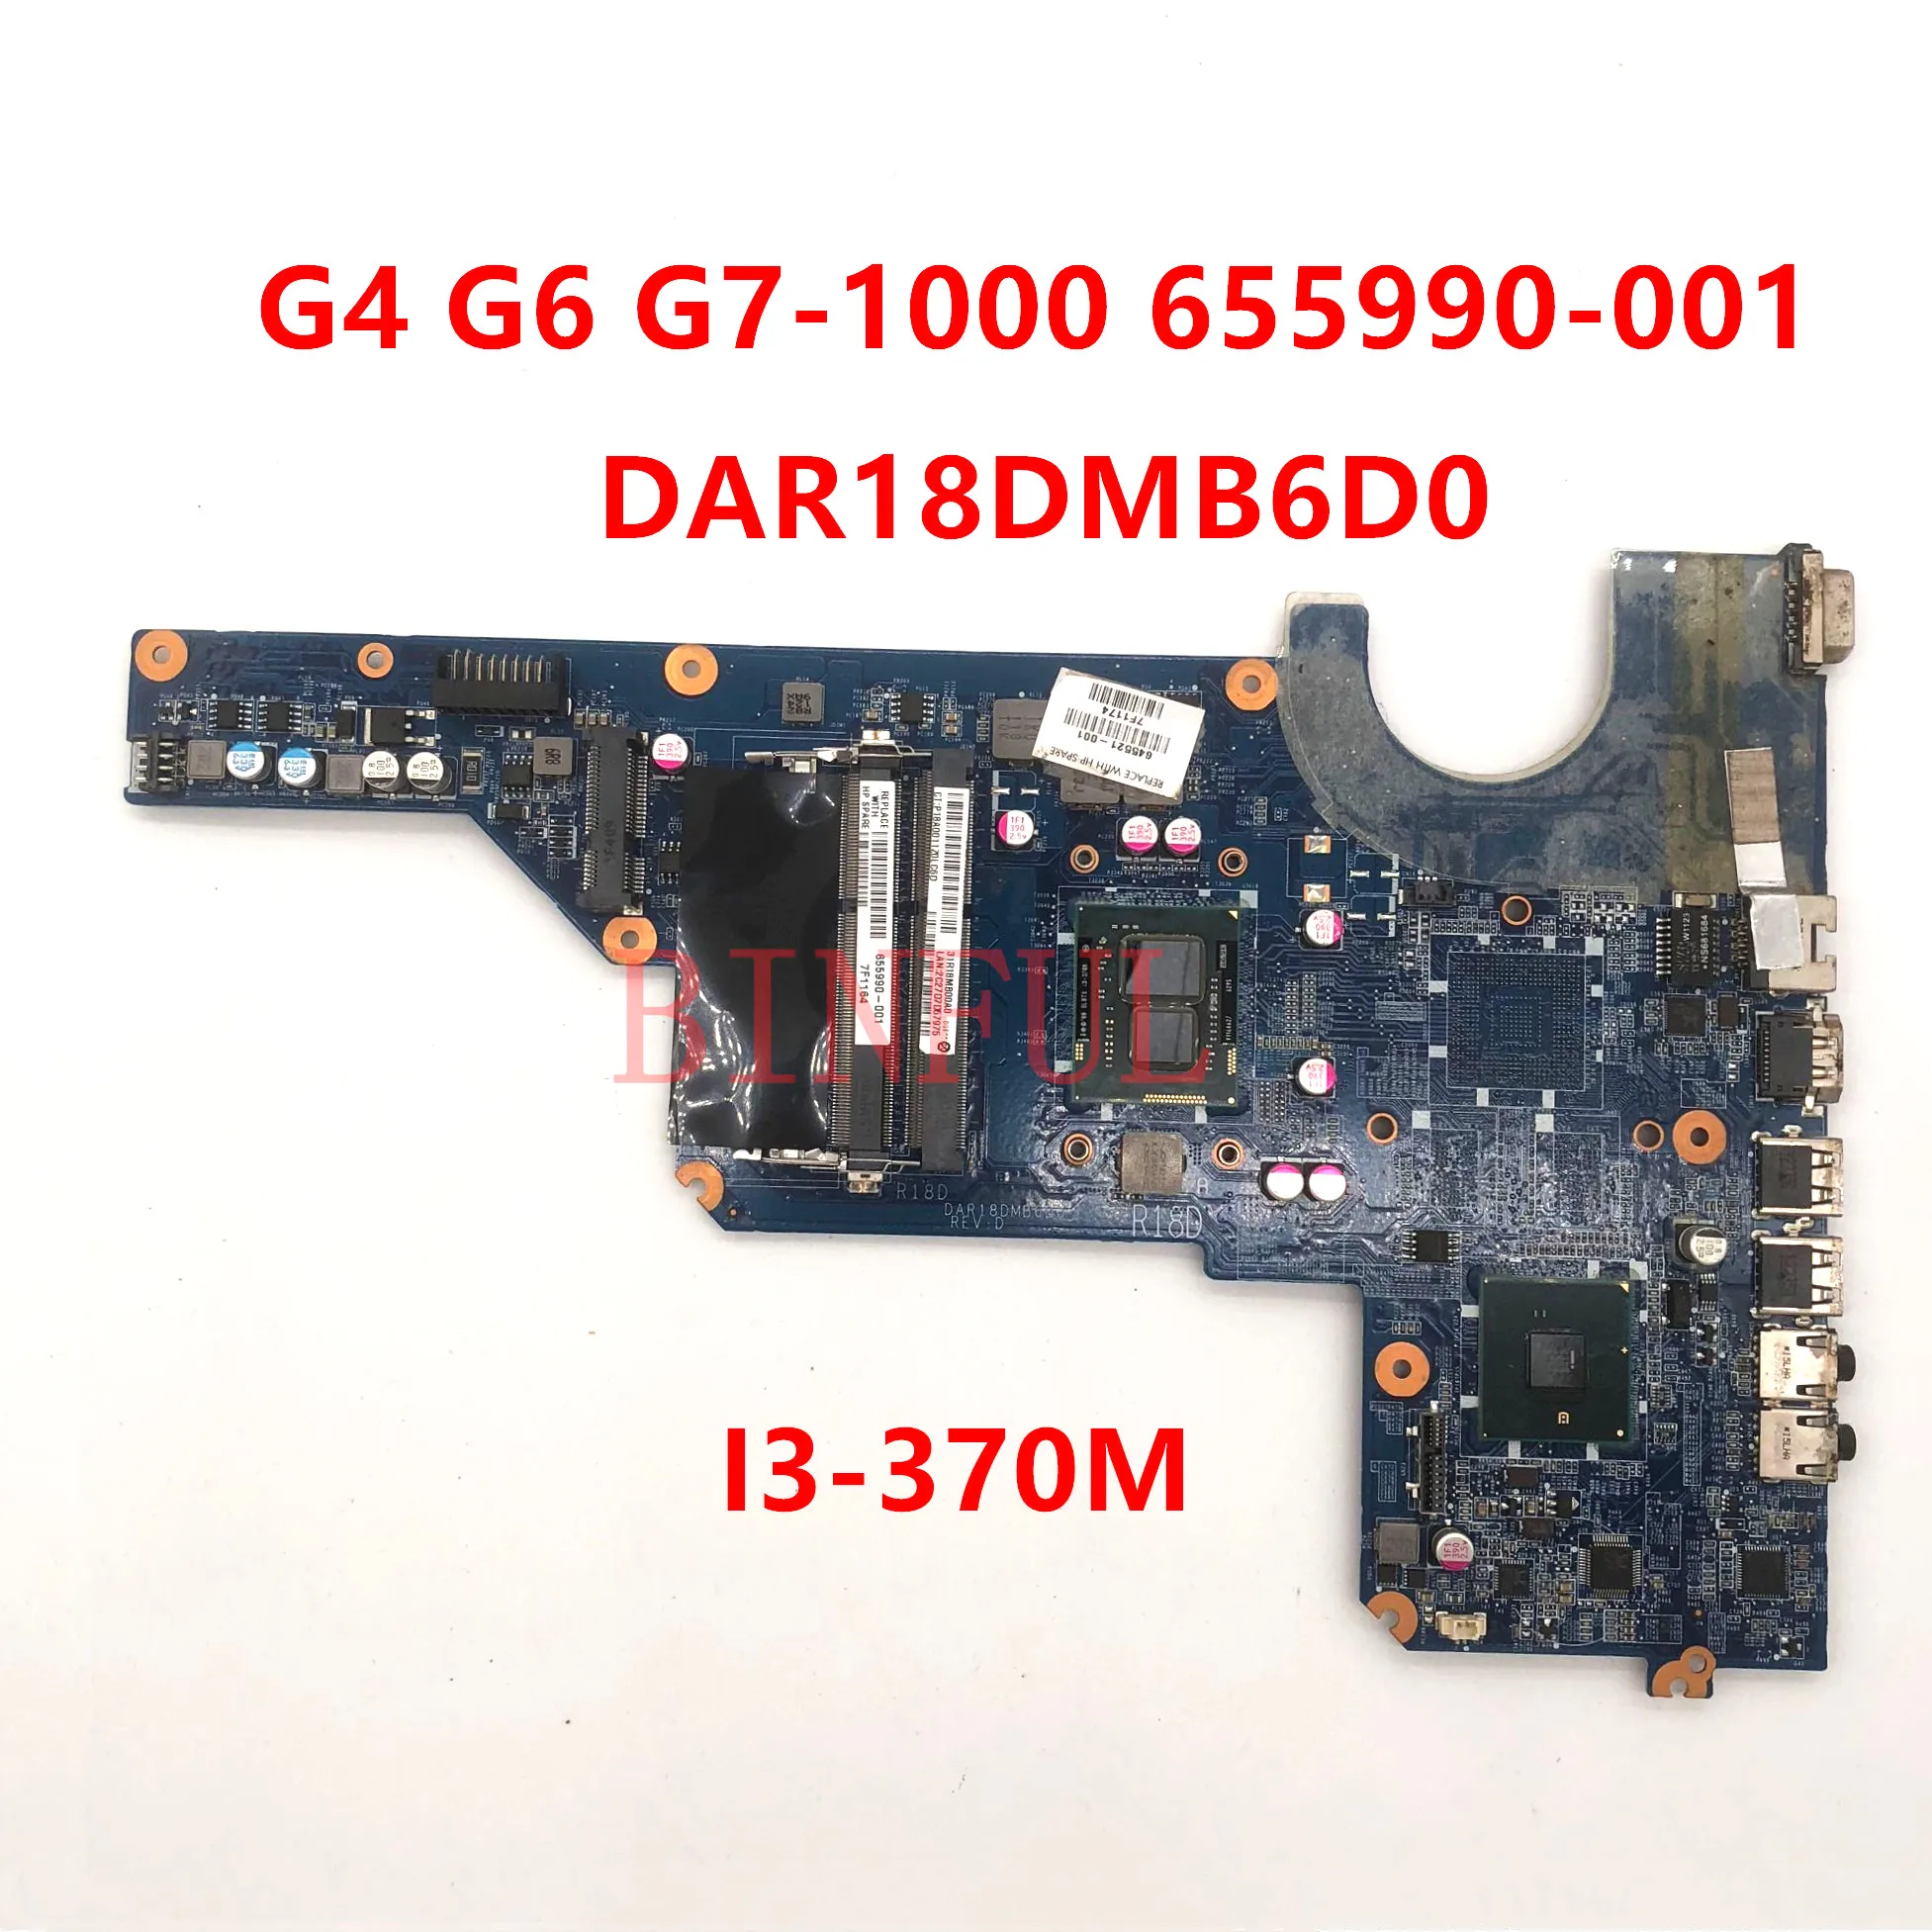 High Quality Mainboard For G4 G6 G7 G6-1000 Laptop Motherboard 655990-001 DAR18DMB6D0 I3-370M CPU HM55 DDR3 8GB 100% Working OK